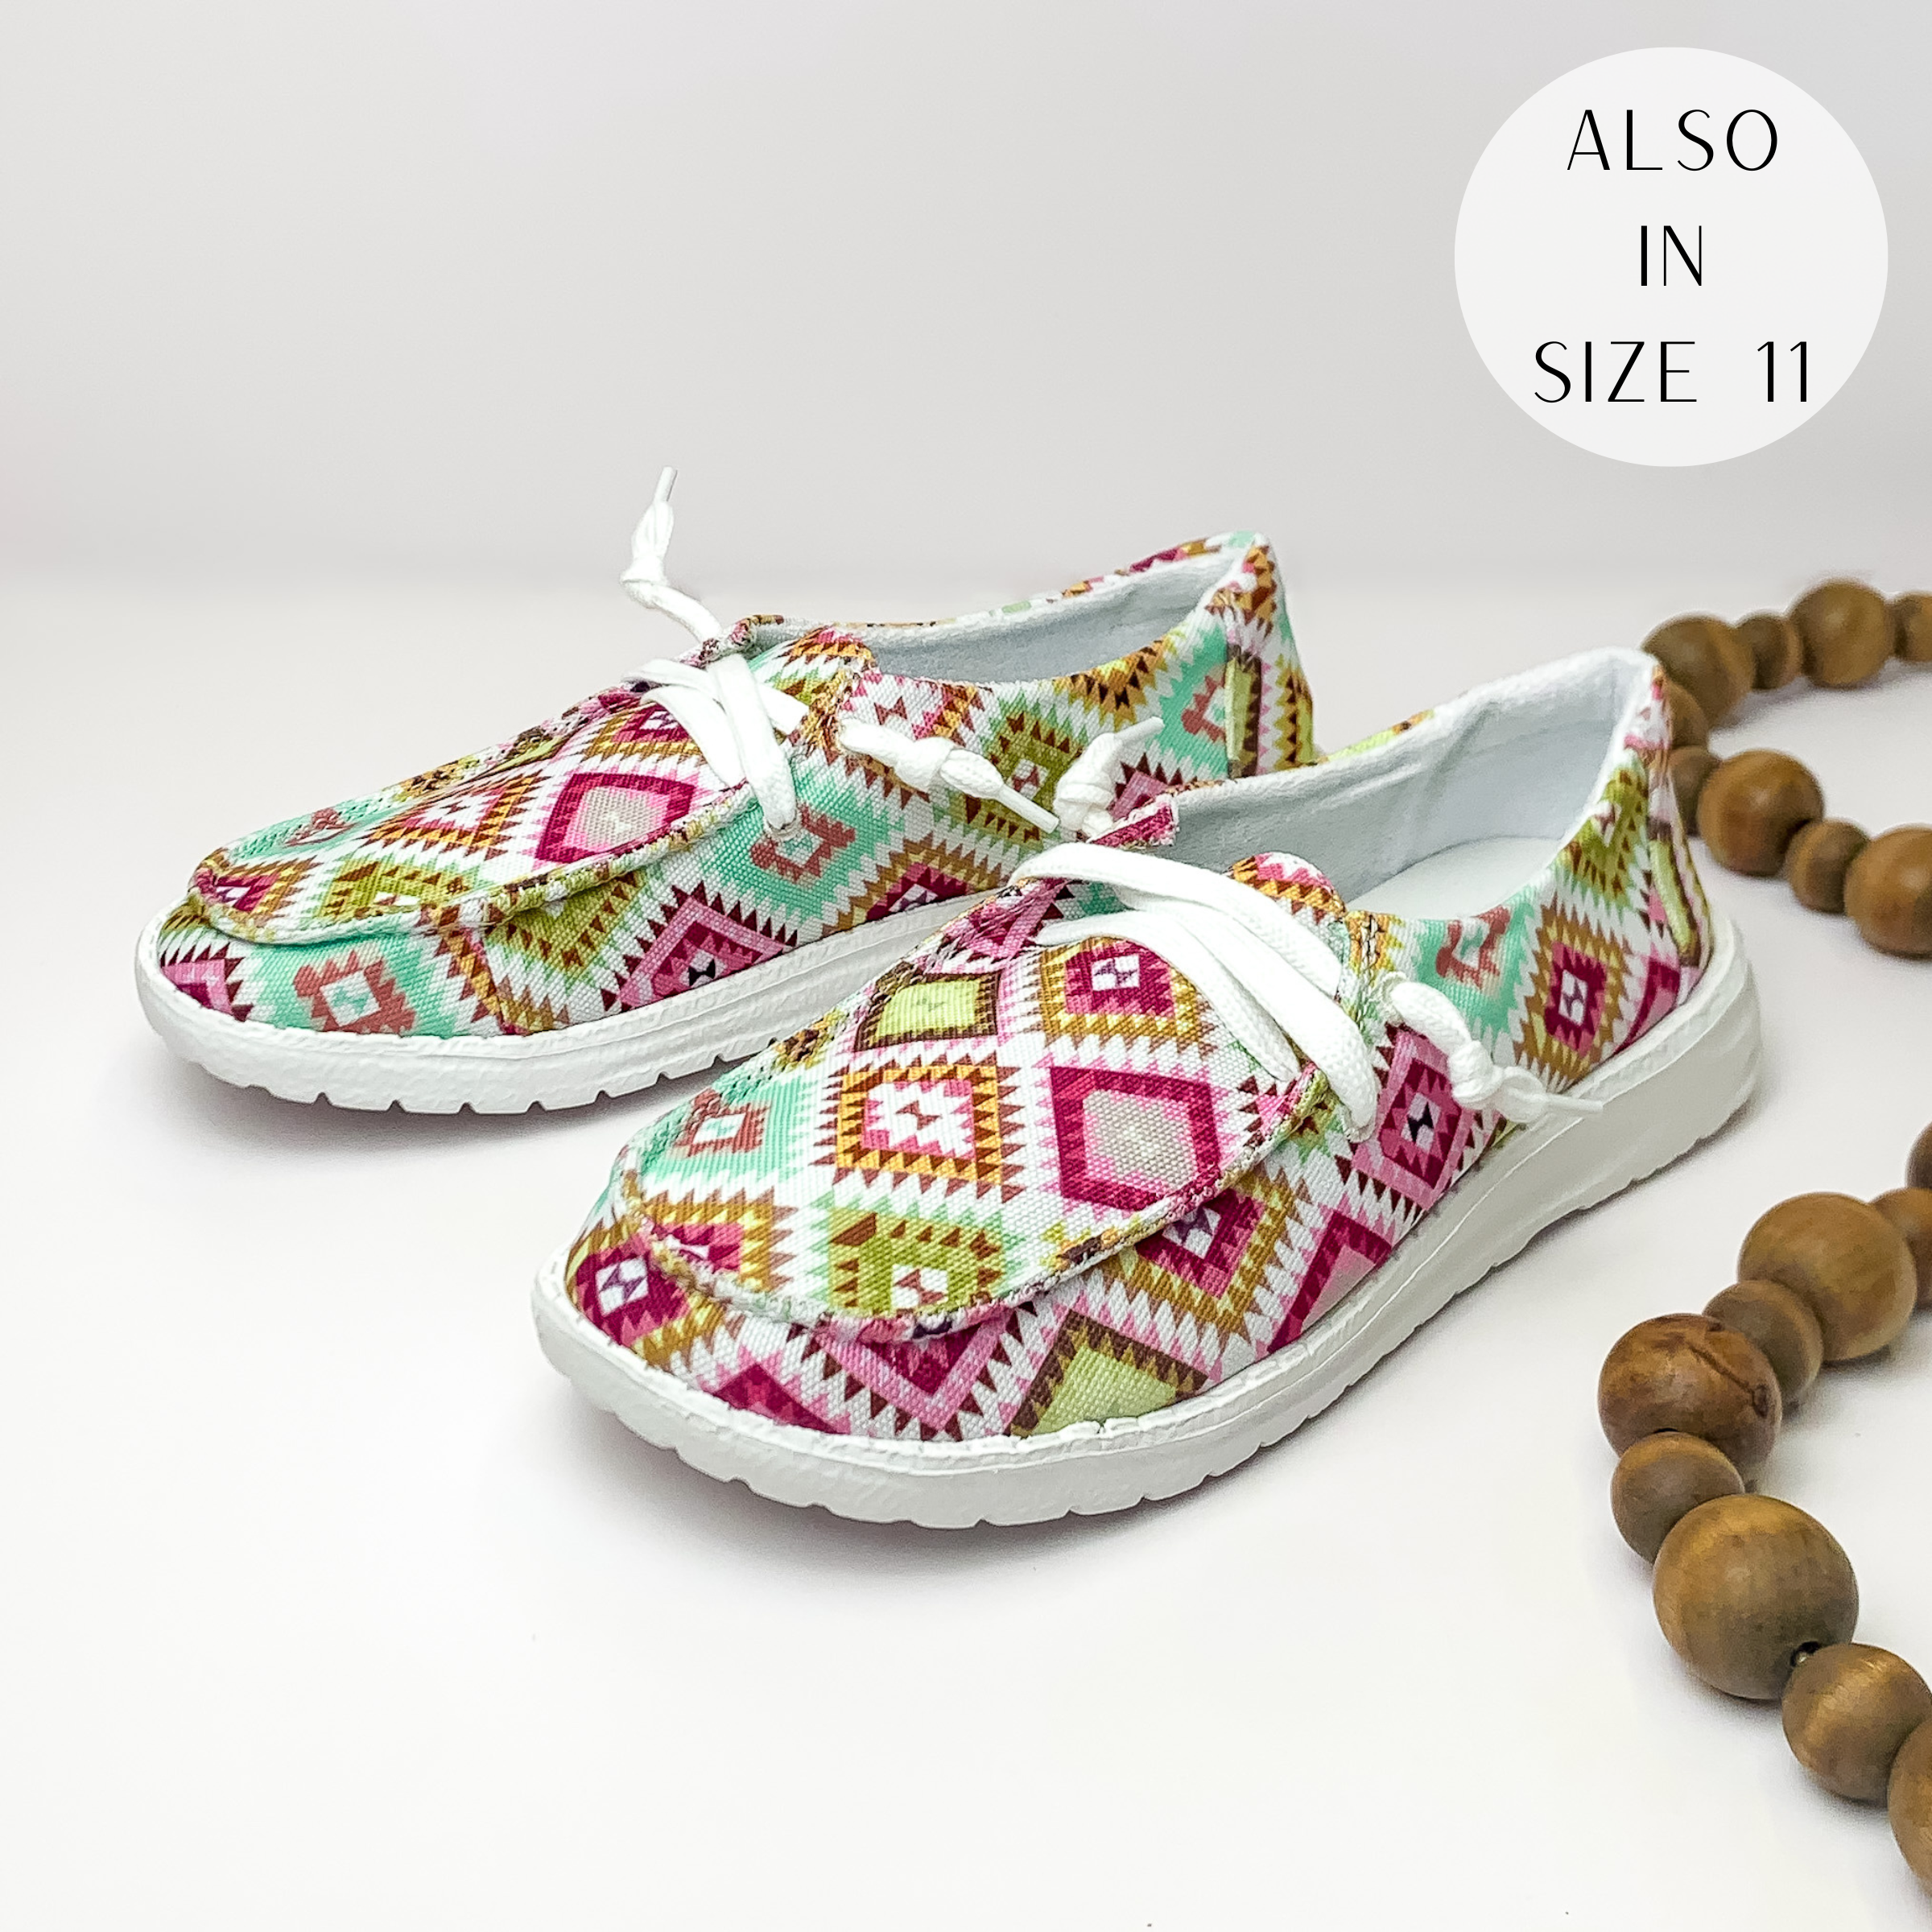 White shoes with a pink, red, green, teal, and yellow aztec print and white laces. These shoes are pictured on a white background with brown beads on the right side.